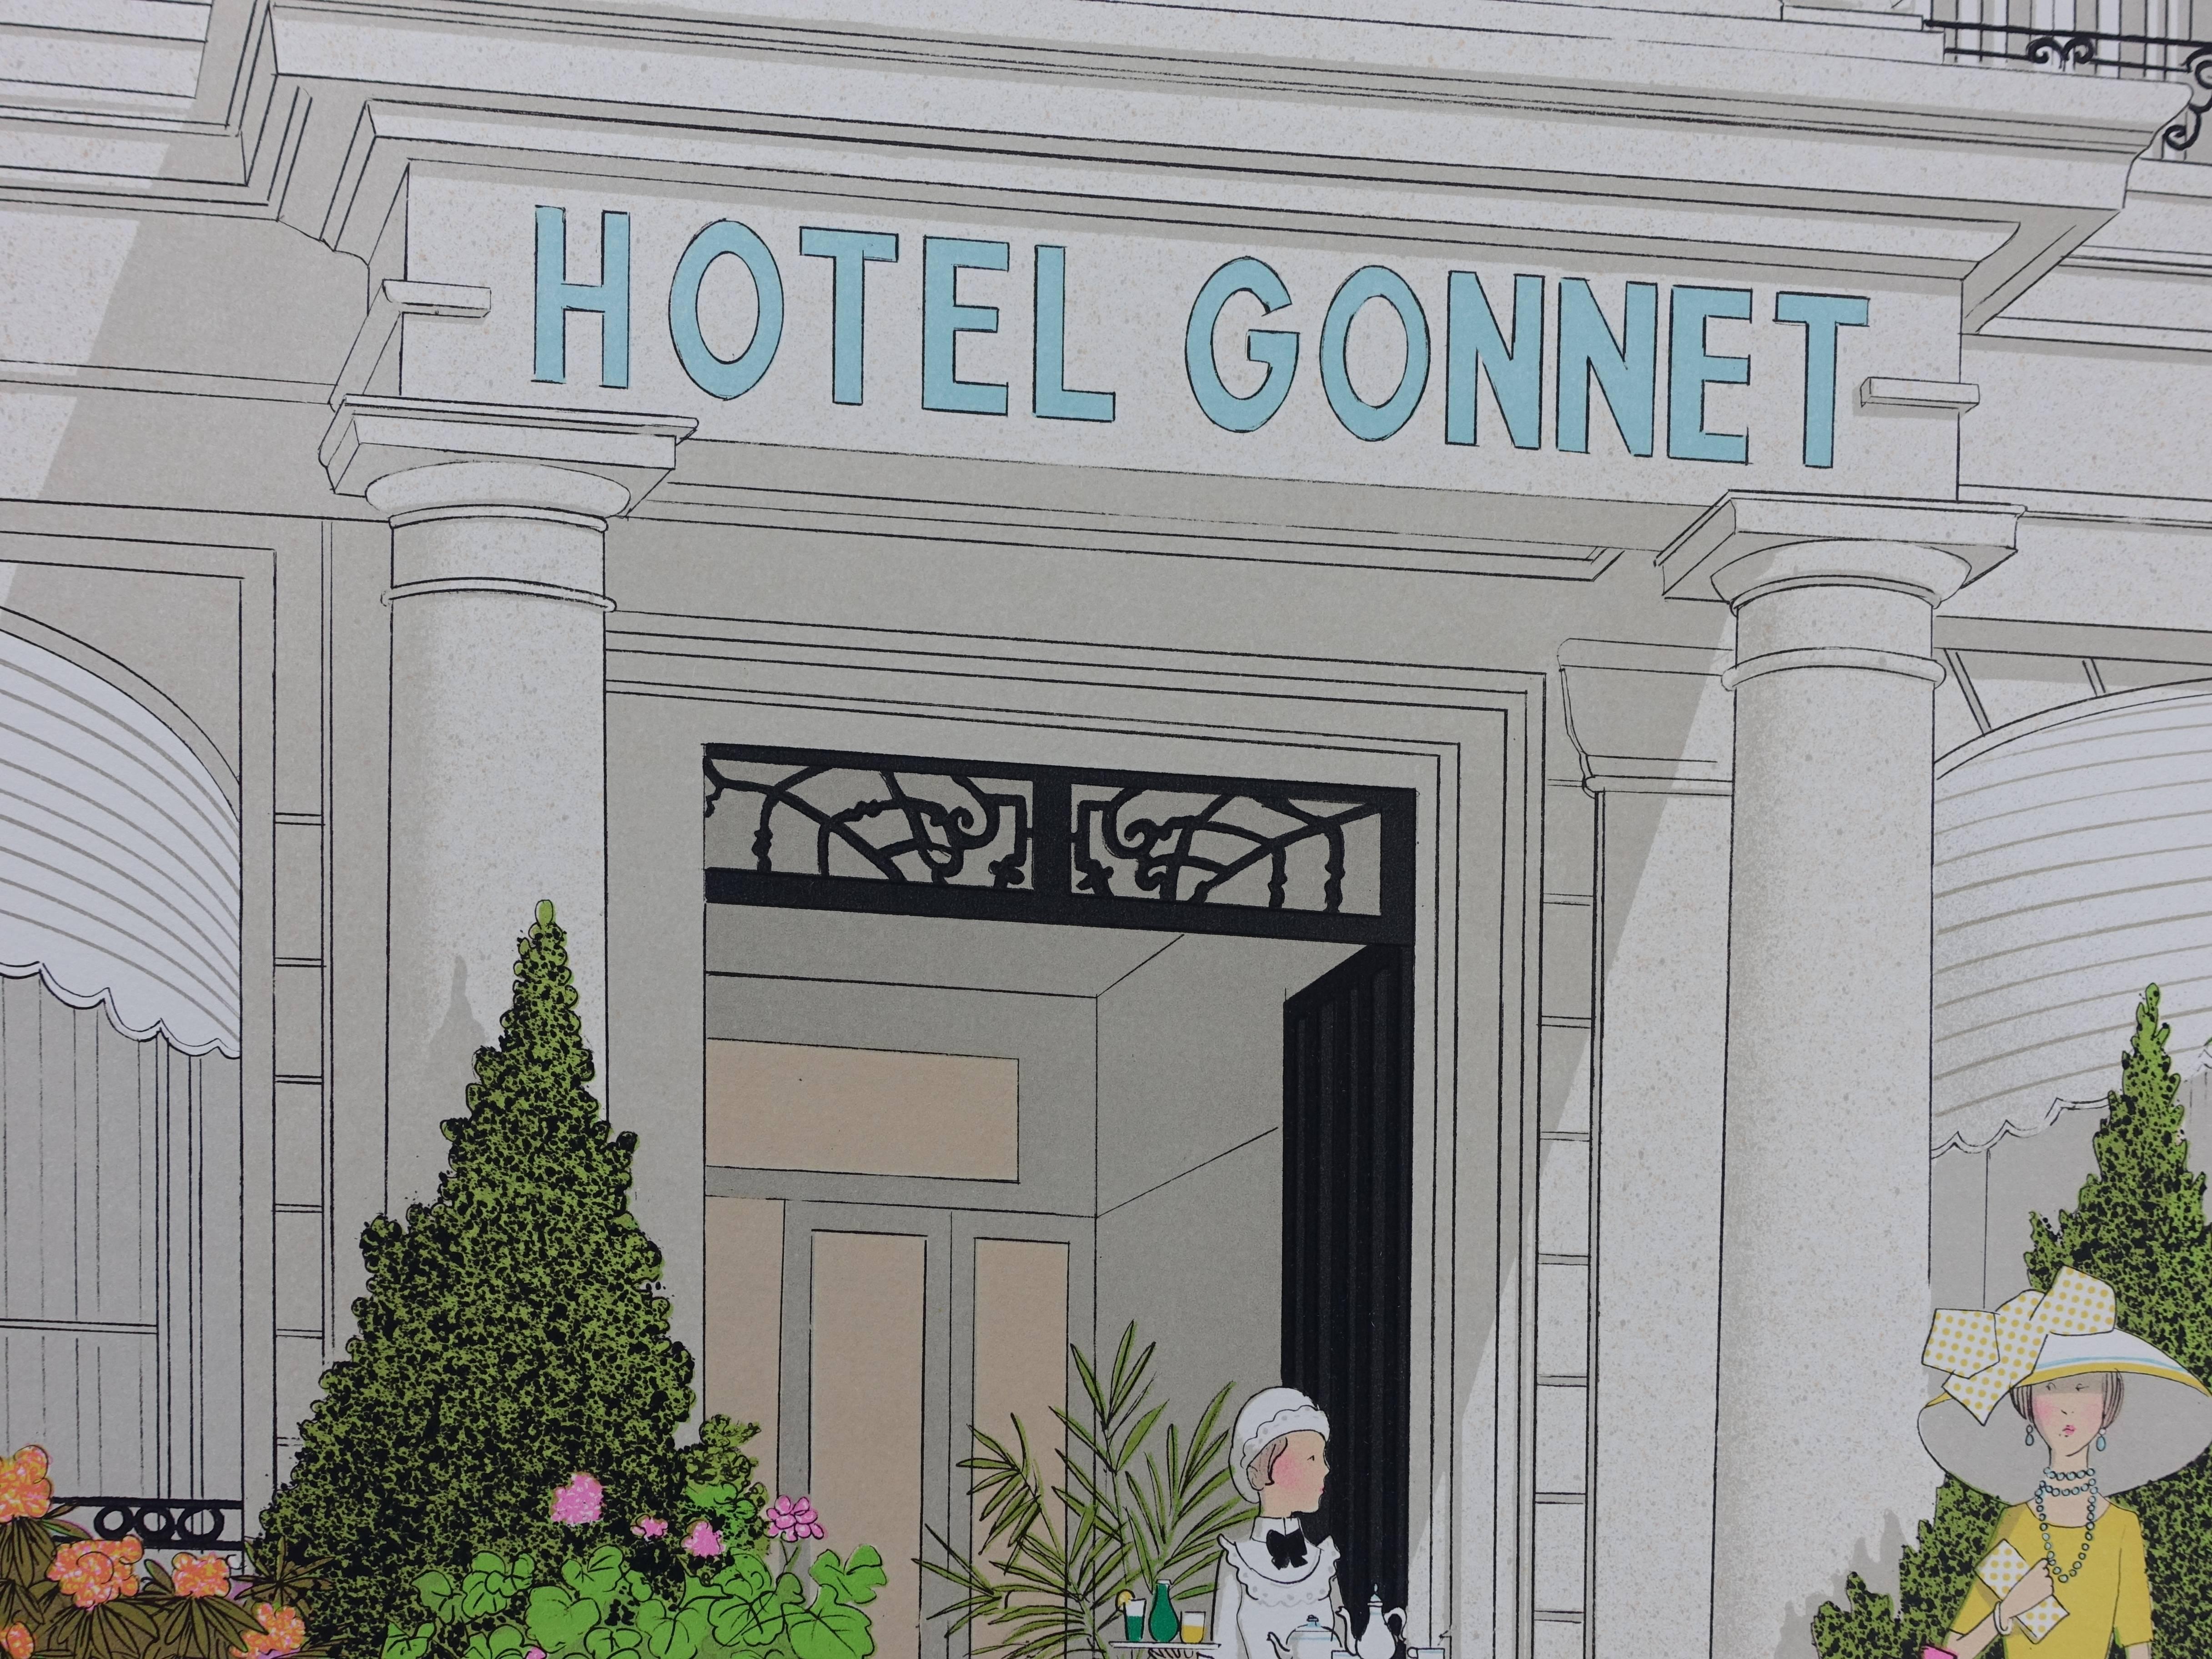 Mercedes 370 and Hotel Gonnet - Signed lithograph - 115ex 3